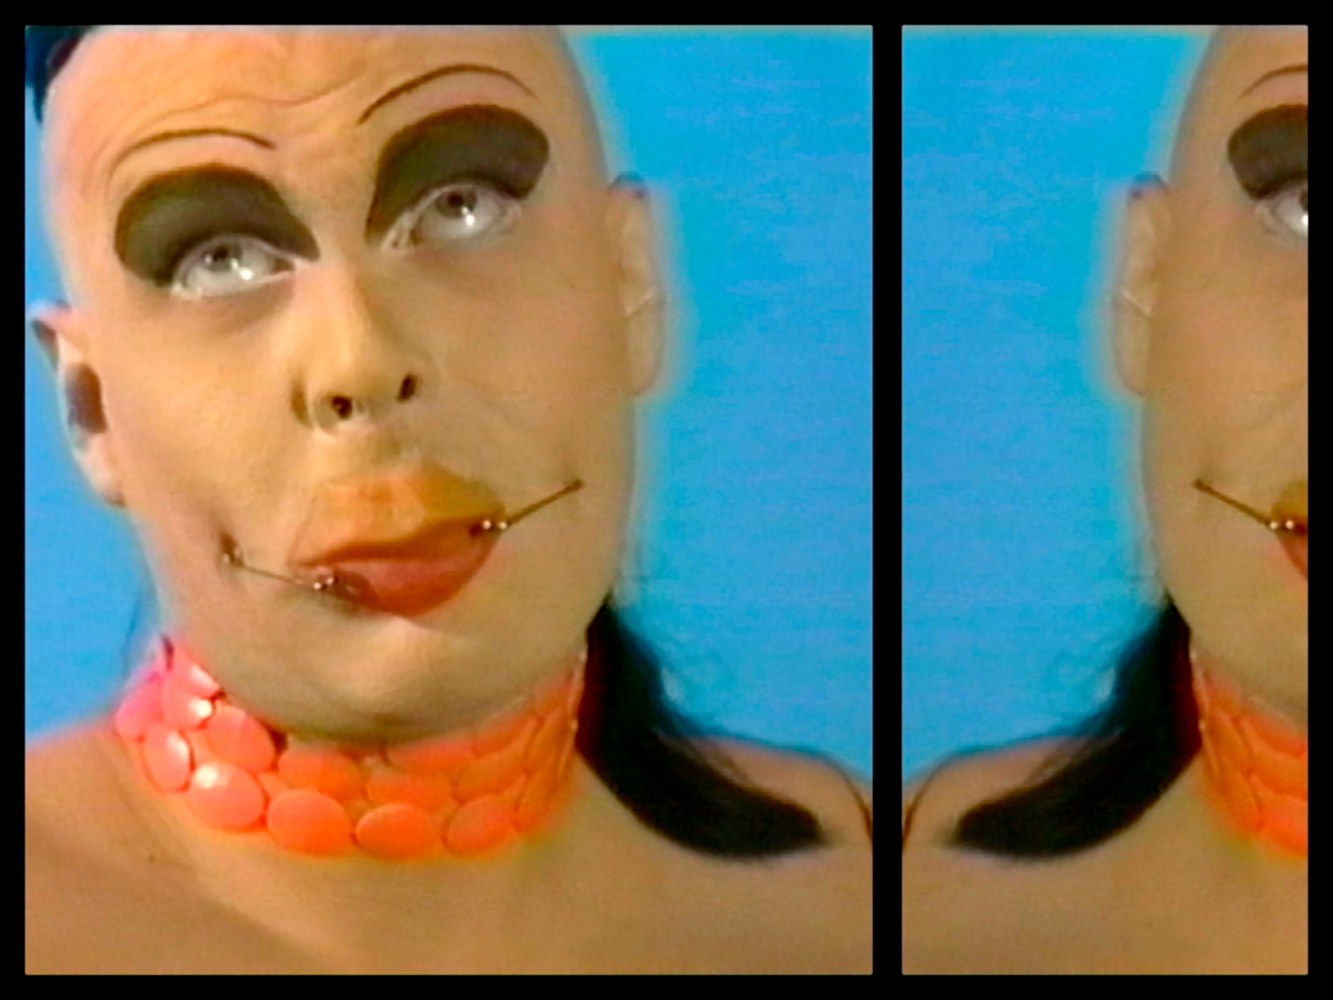 Charles Atlas
Teach, 1992/1998
Single-channel video projection, sound
Duration: 7 minutes, 47 seconds